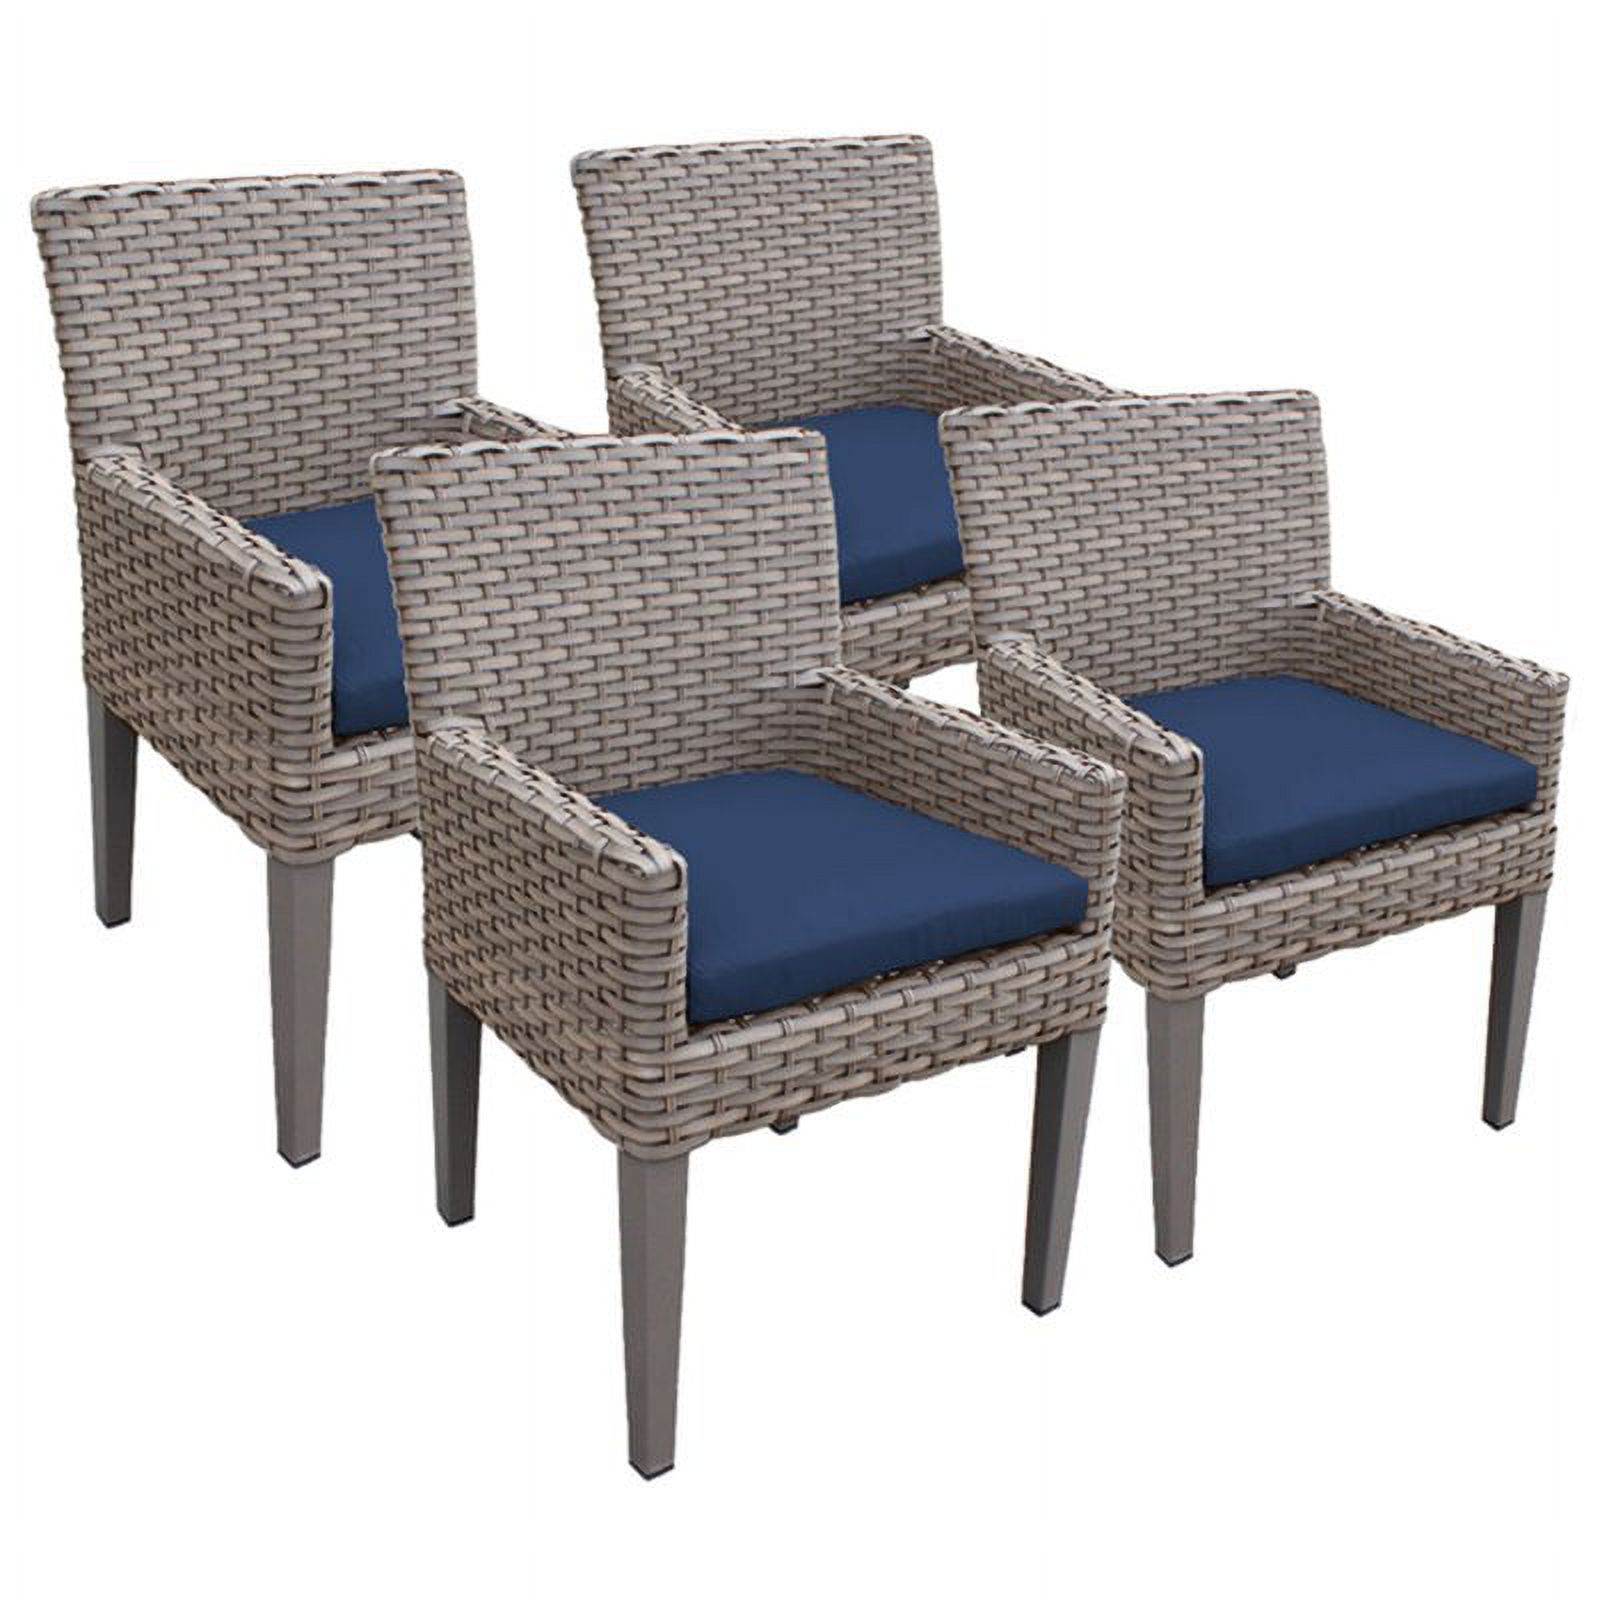 TK Classics Oasis Patio Dining Arm Chair in Navy (Set of 4) - image 1 of 2